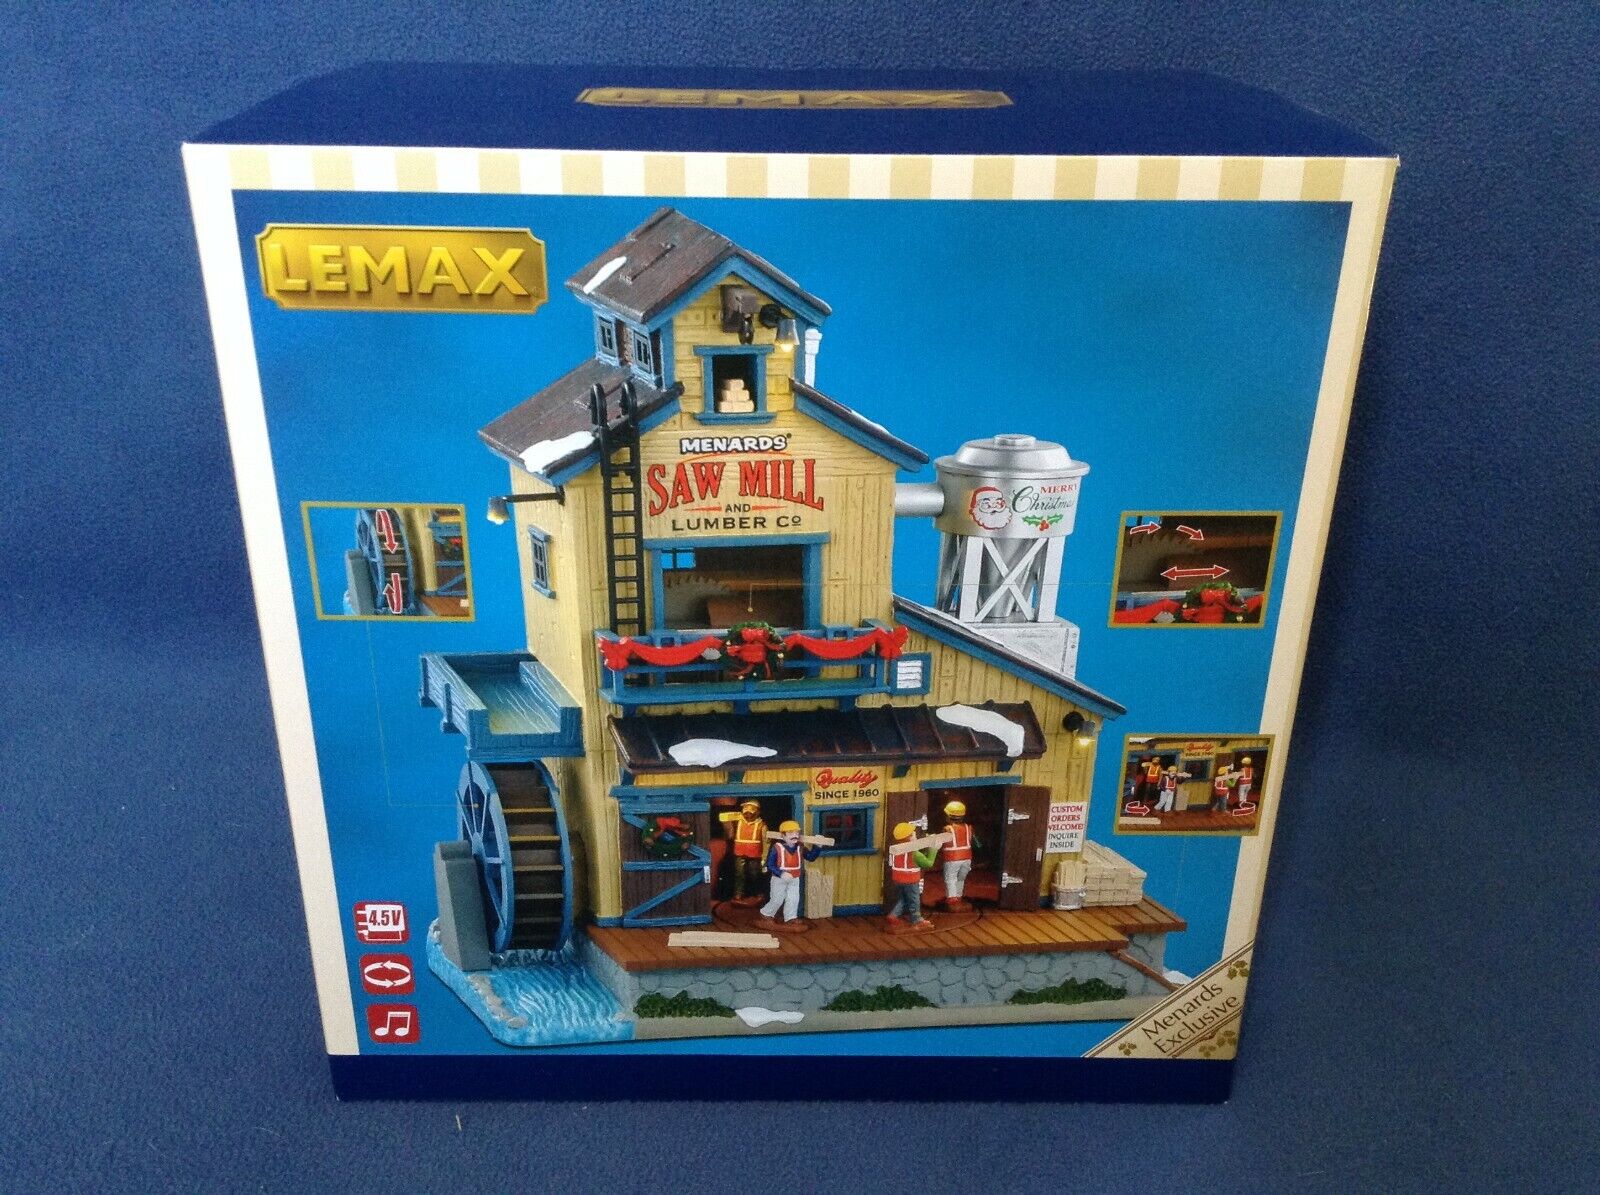 2020 LEMAX Exclusive MENARDS SAW MILL Sights & Sounds Christmas Village House